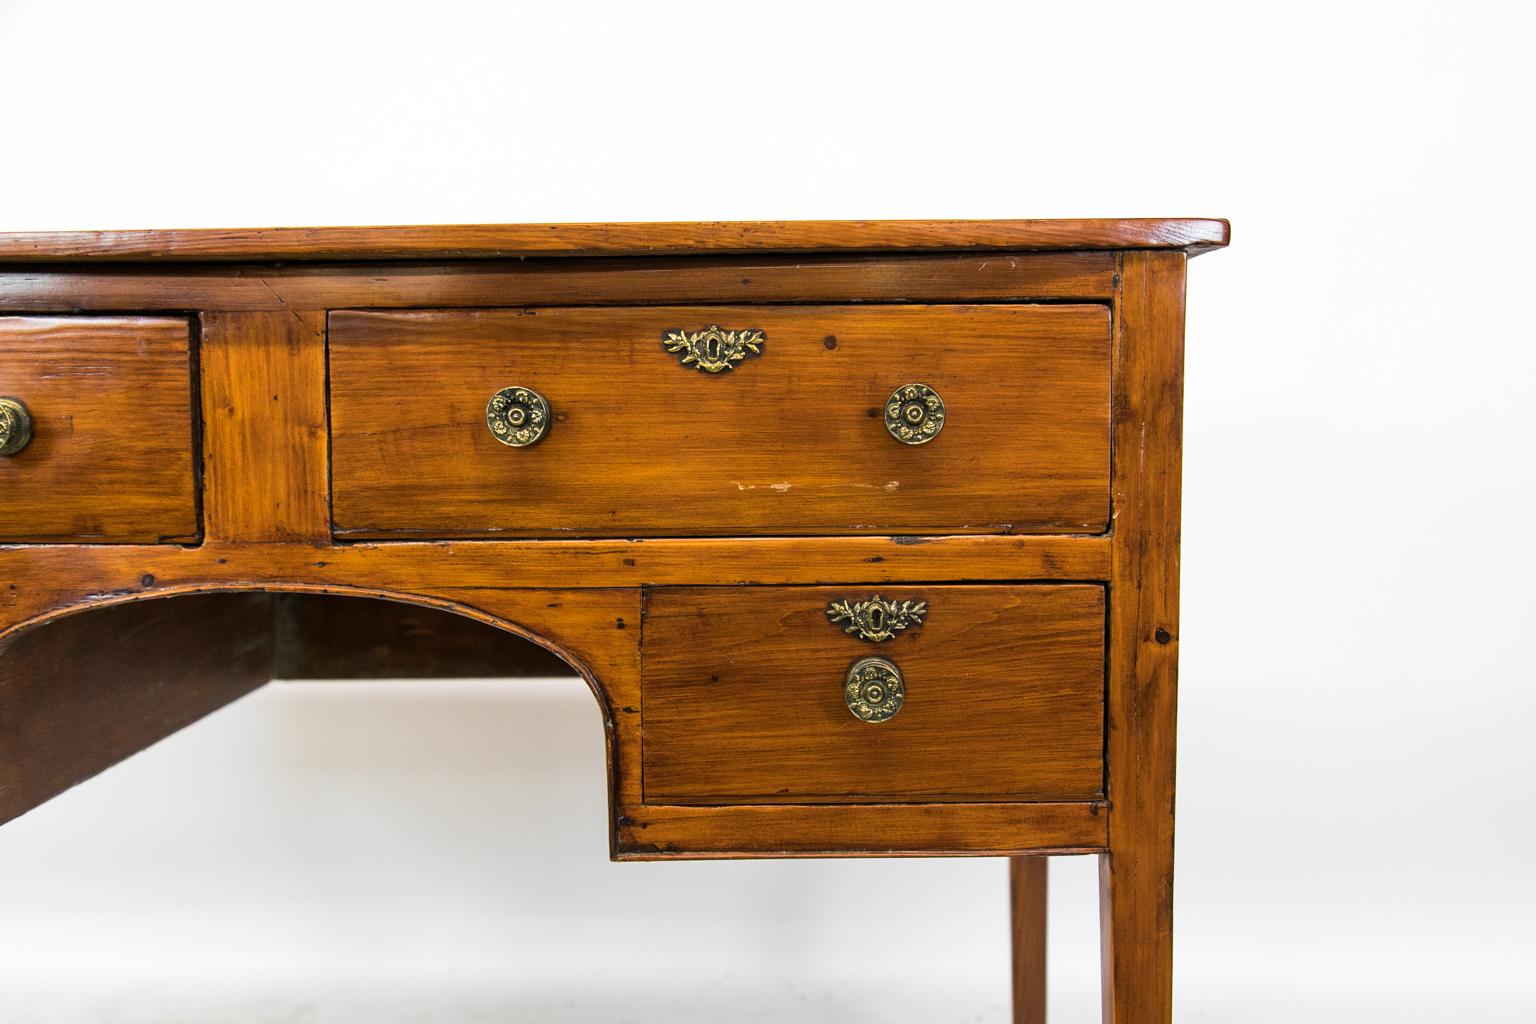 Pine English four-drawer console table is supported by four tapered legs and an arched apron with beaded molding. It has been refinished in a darker color.